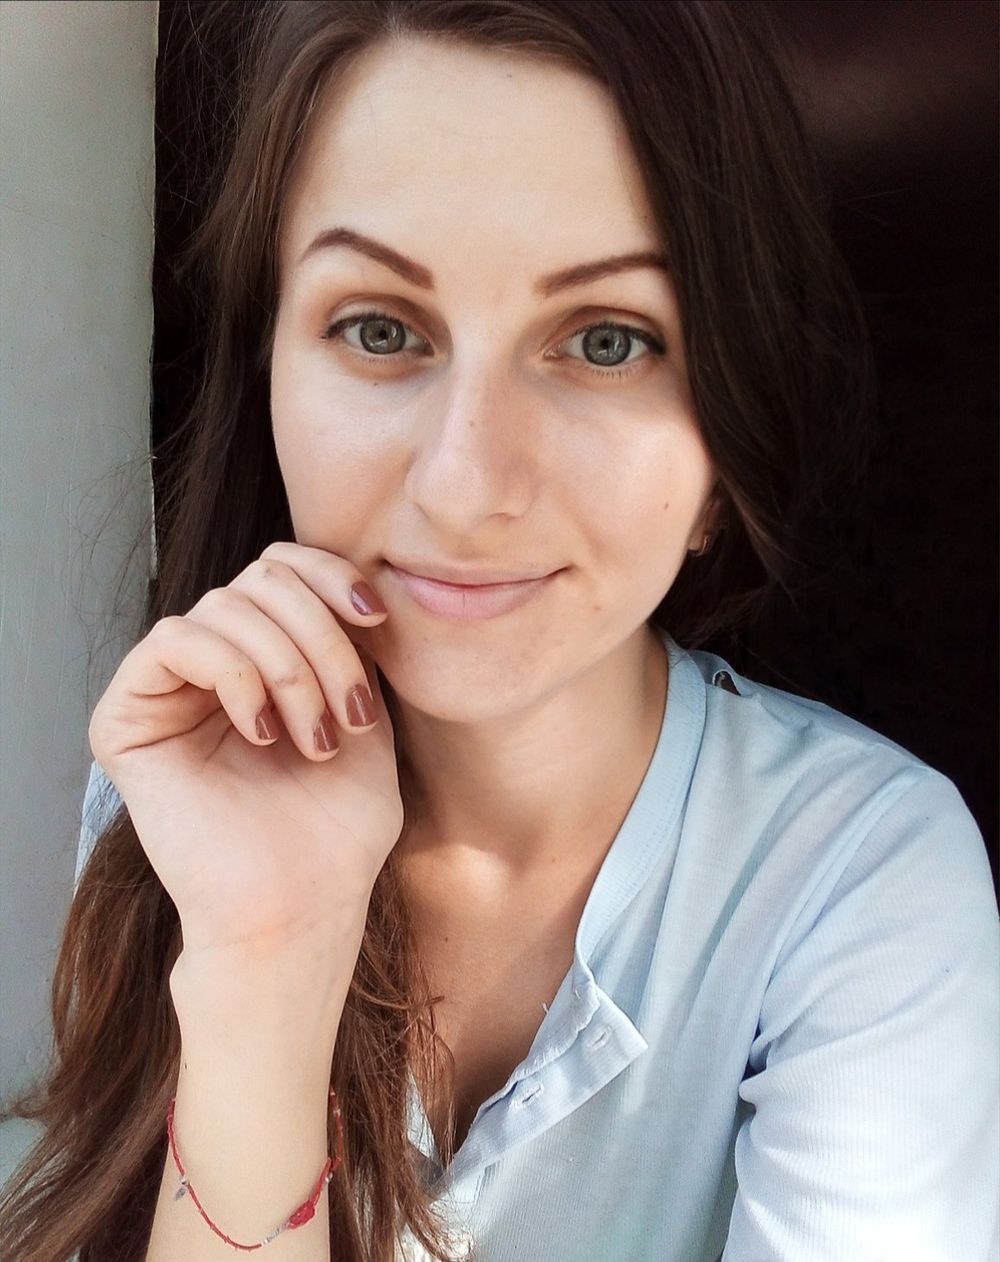 ID 207990 - Kate_cutie from Odessa (Ukraine), 25 years old, brown ...